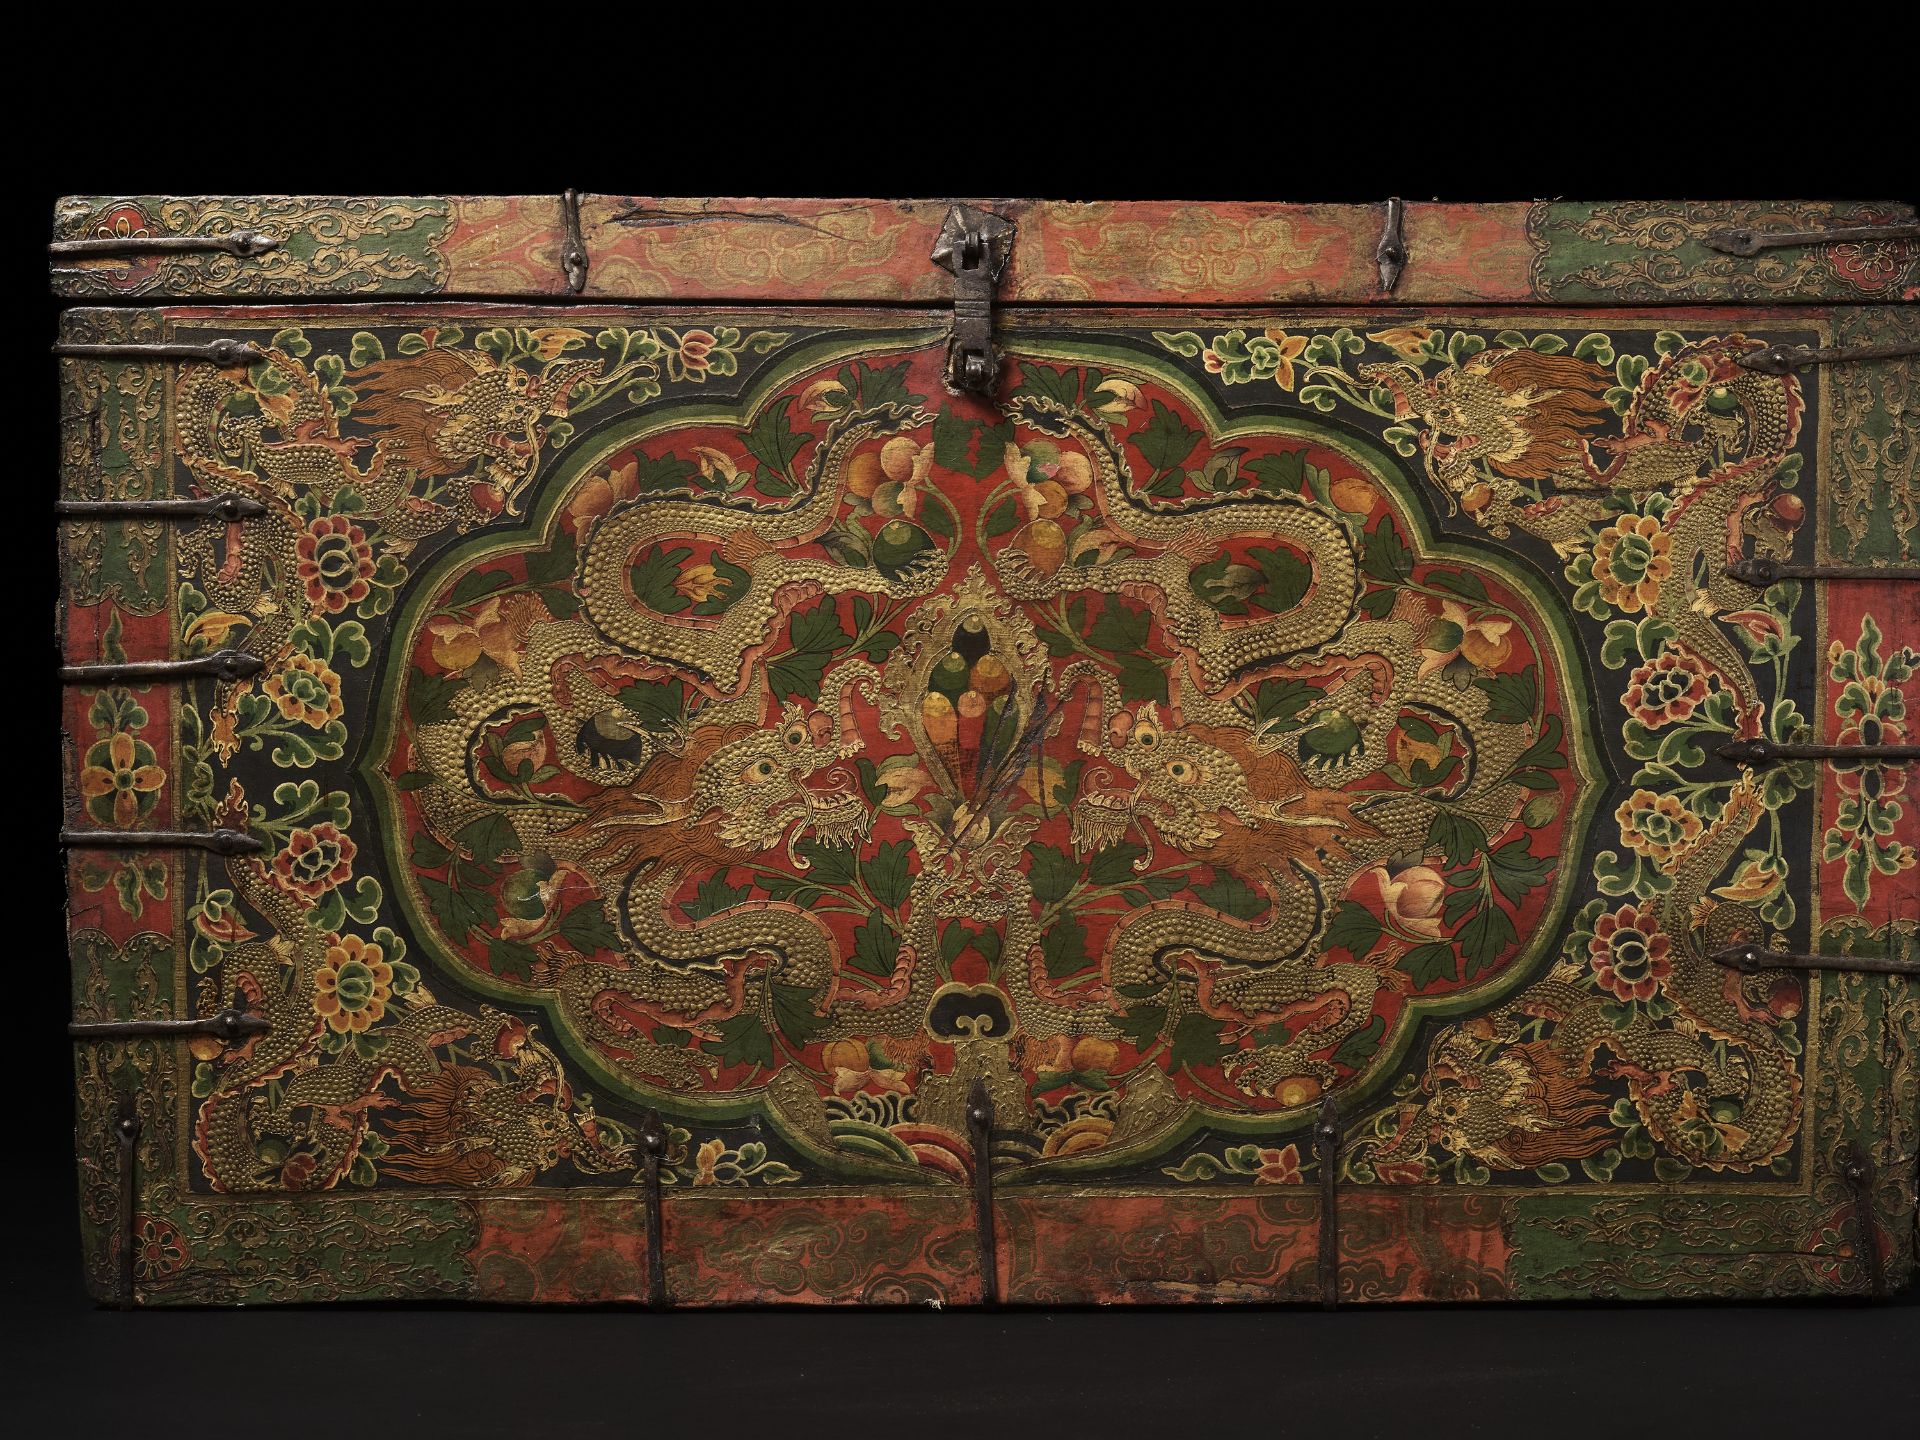 A LARGE PAINTED WOOD 'DRAGON' STORAGE CHEST, 19TH CENTURY - Image 5 of 6